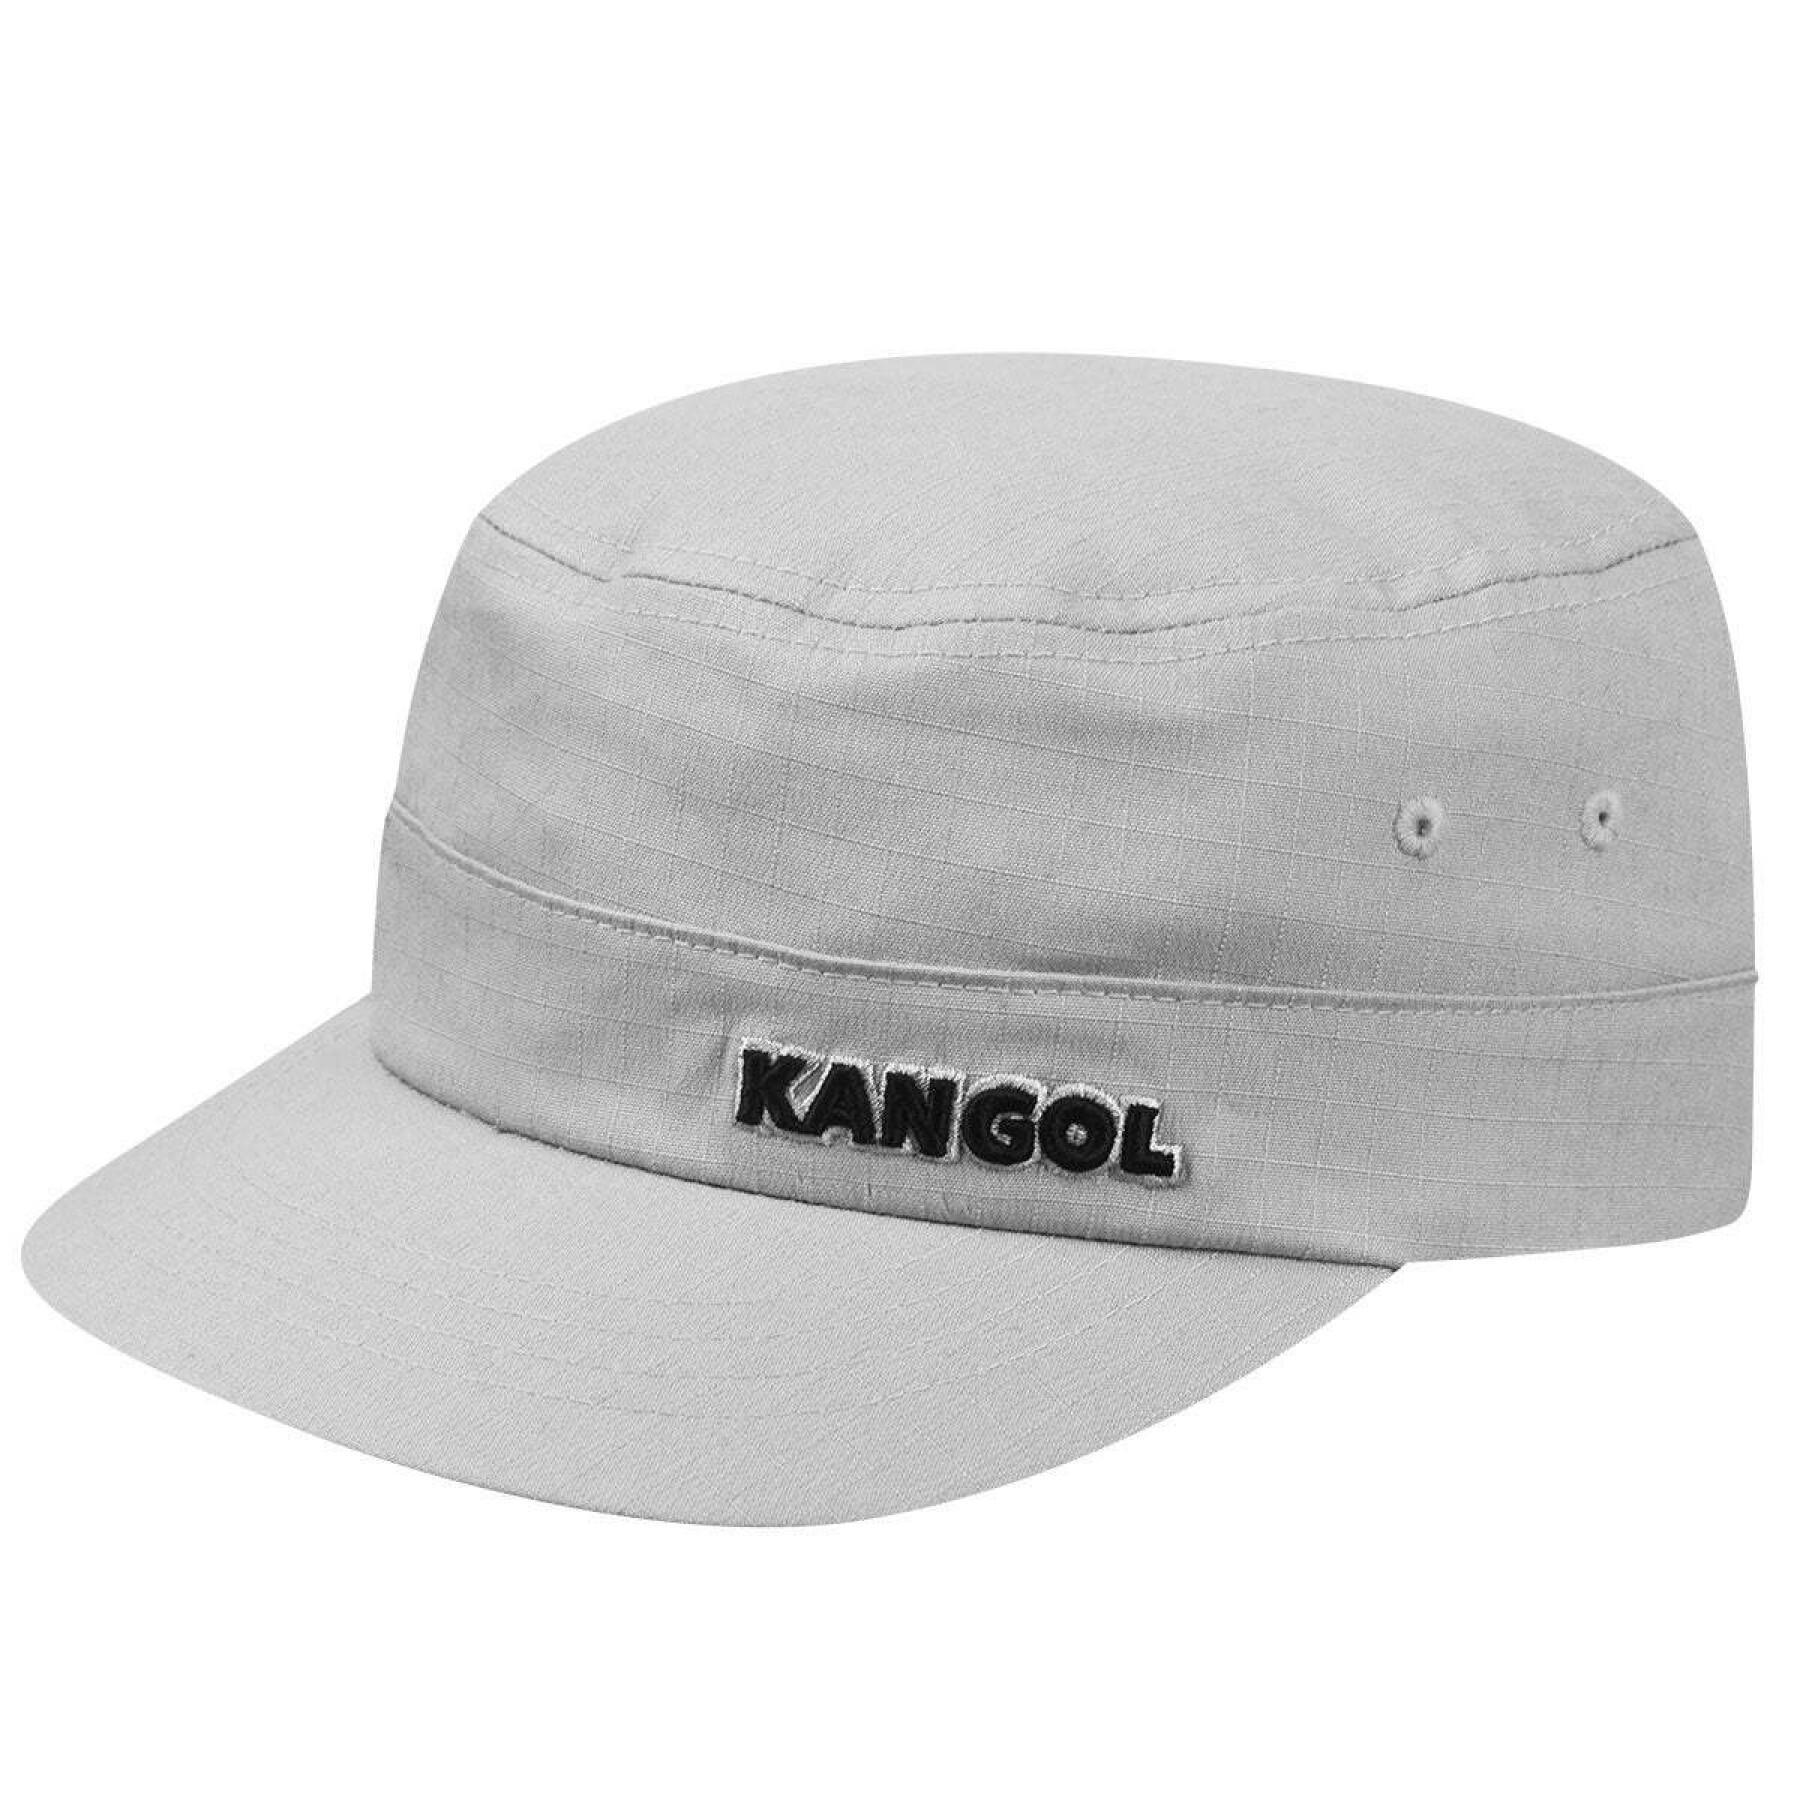 Casquette Kangol Ripstop Army